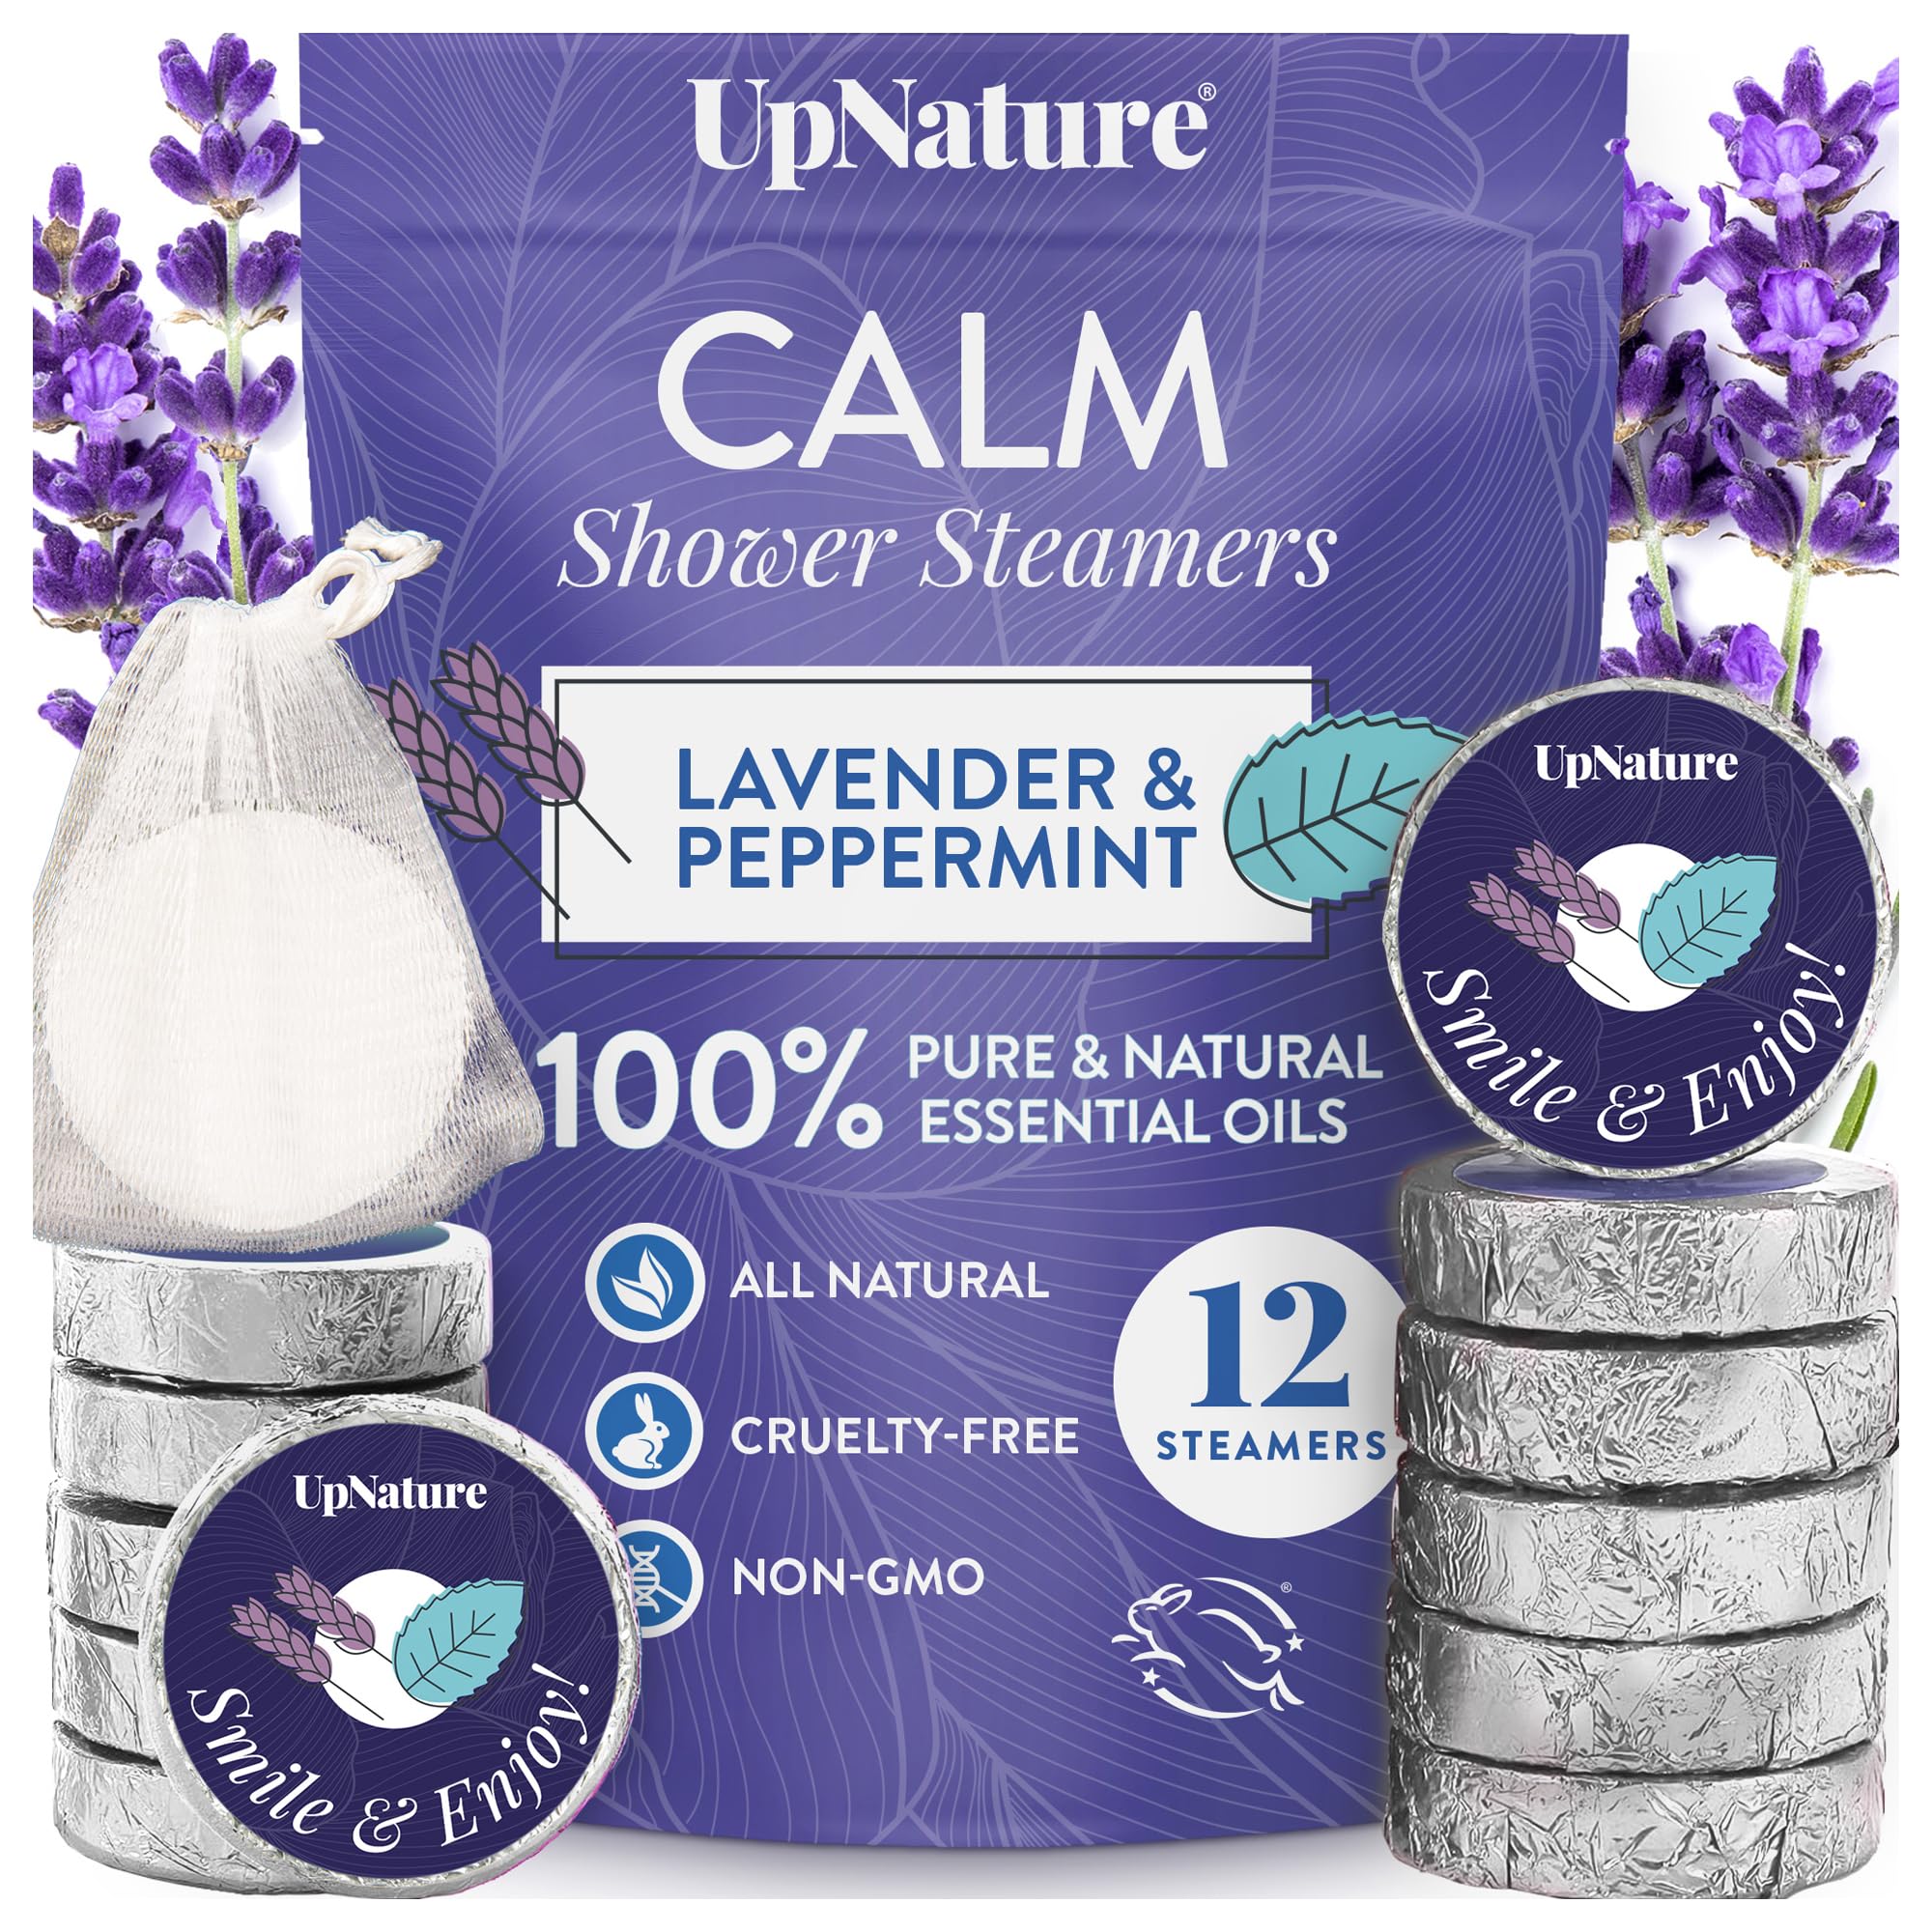 UpNature Shower Steamers Aromatherapy, Calm 12pcs - Lavender Shower Steamer Restore Relaxation, Essential Oil Lavender Shower Bath Bombs Tablets for Stress Relief, Self Care Gifts for Women & Men